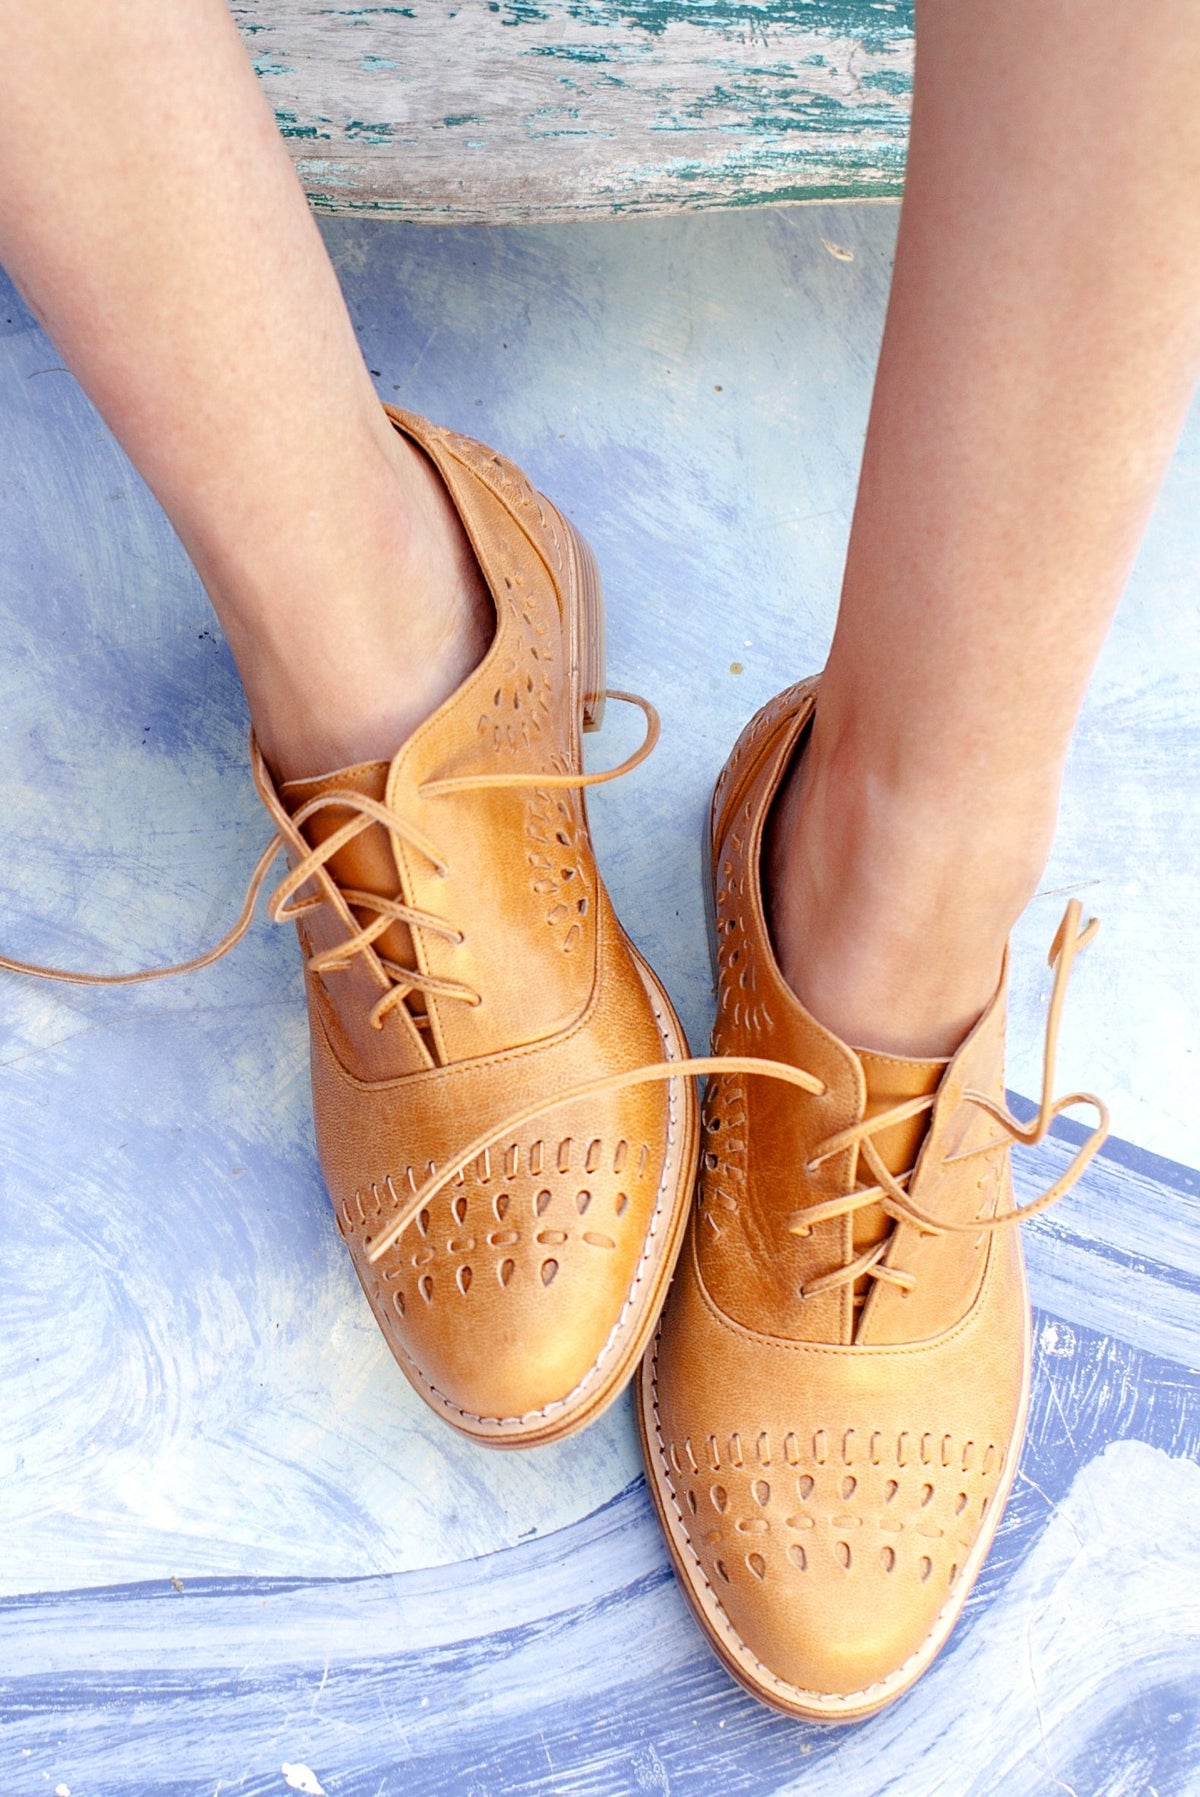 Brown Oxfords